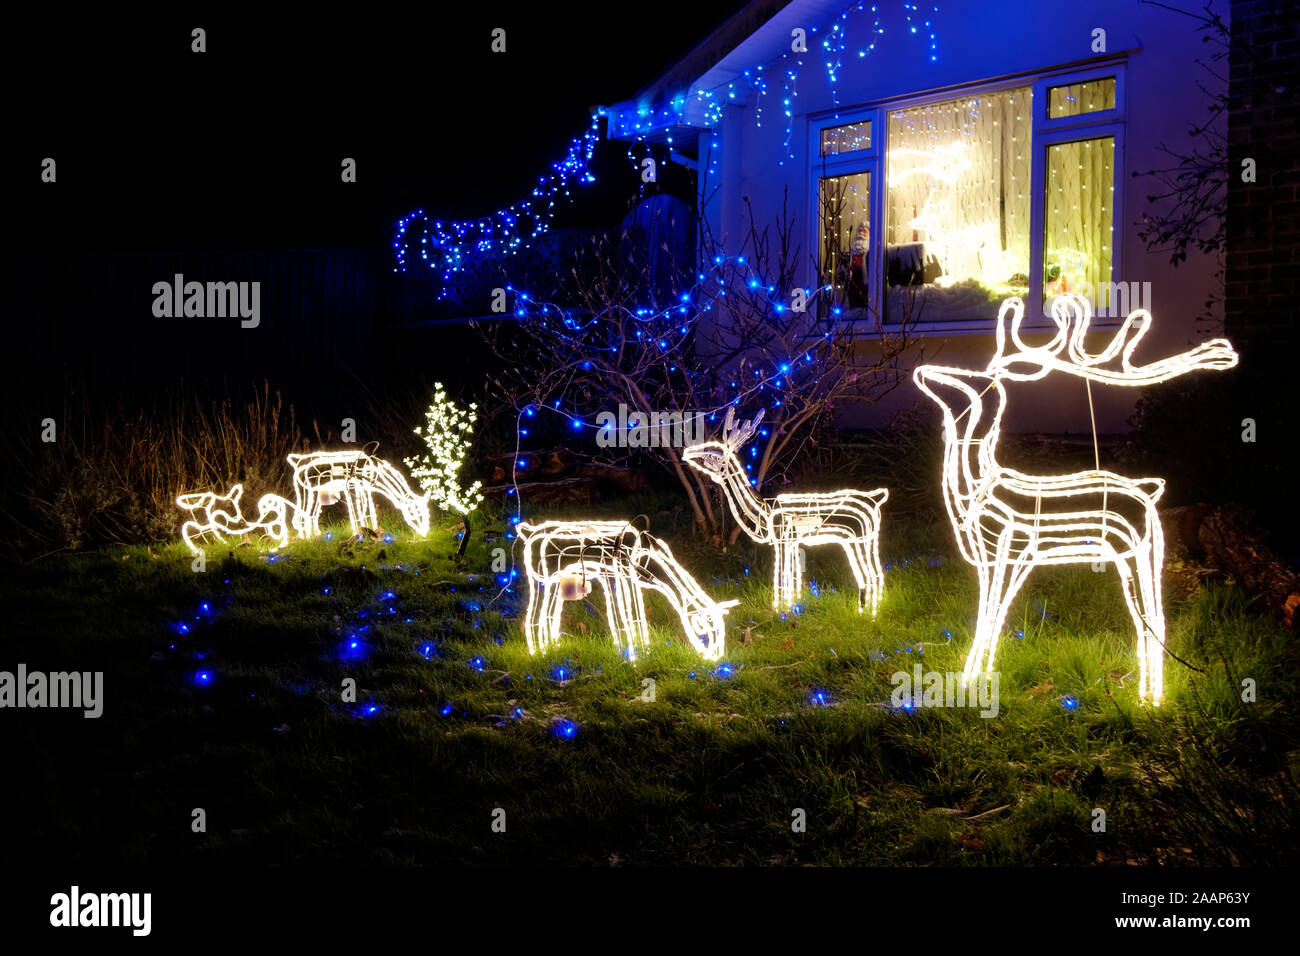 Illuminated Led Reindeer Christmas Garden Decorations On The Front